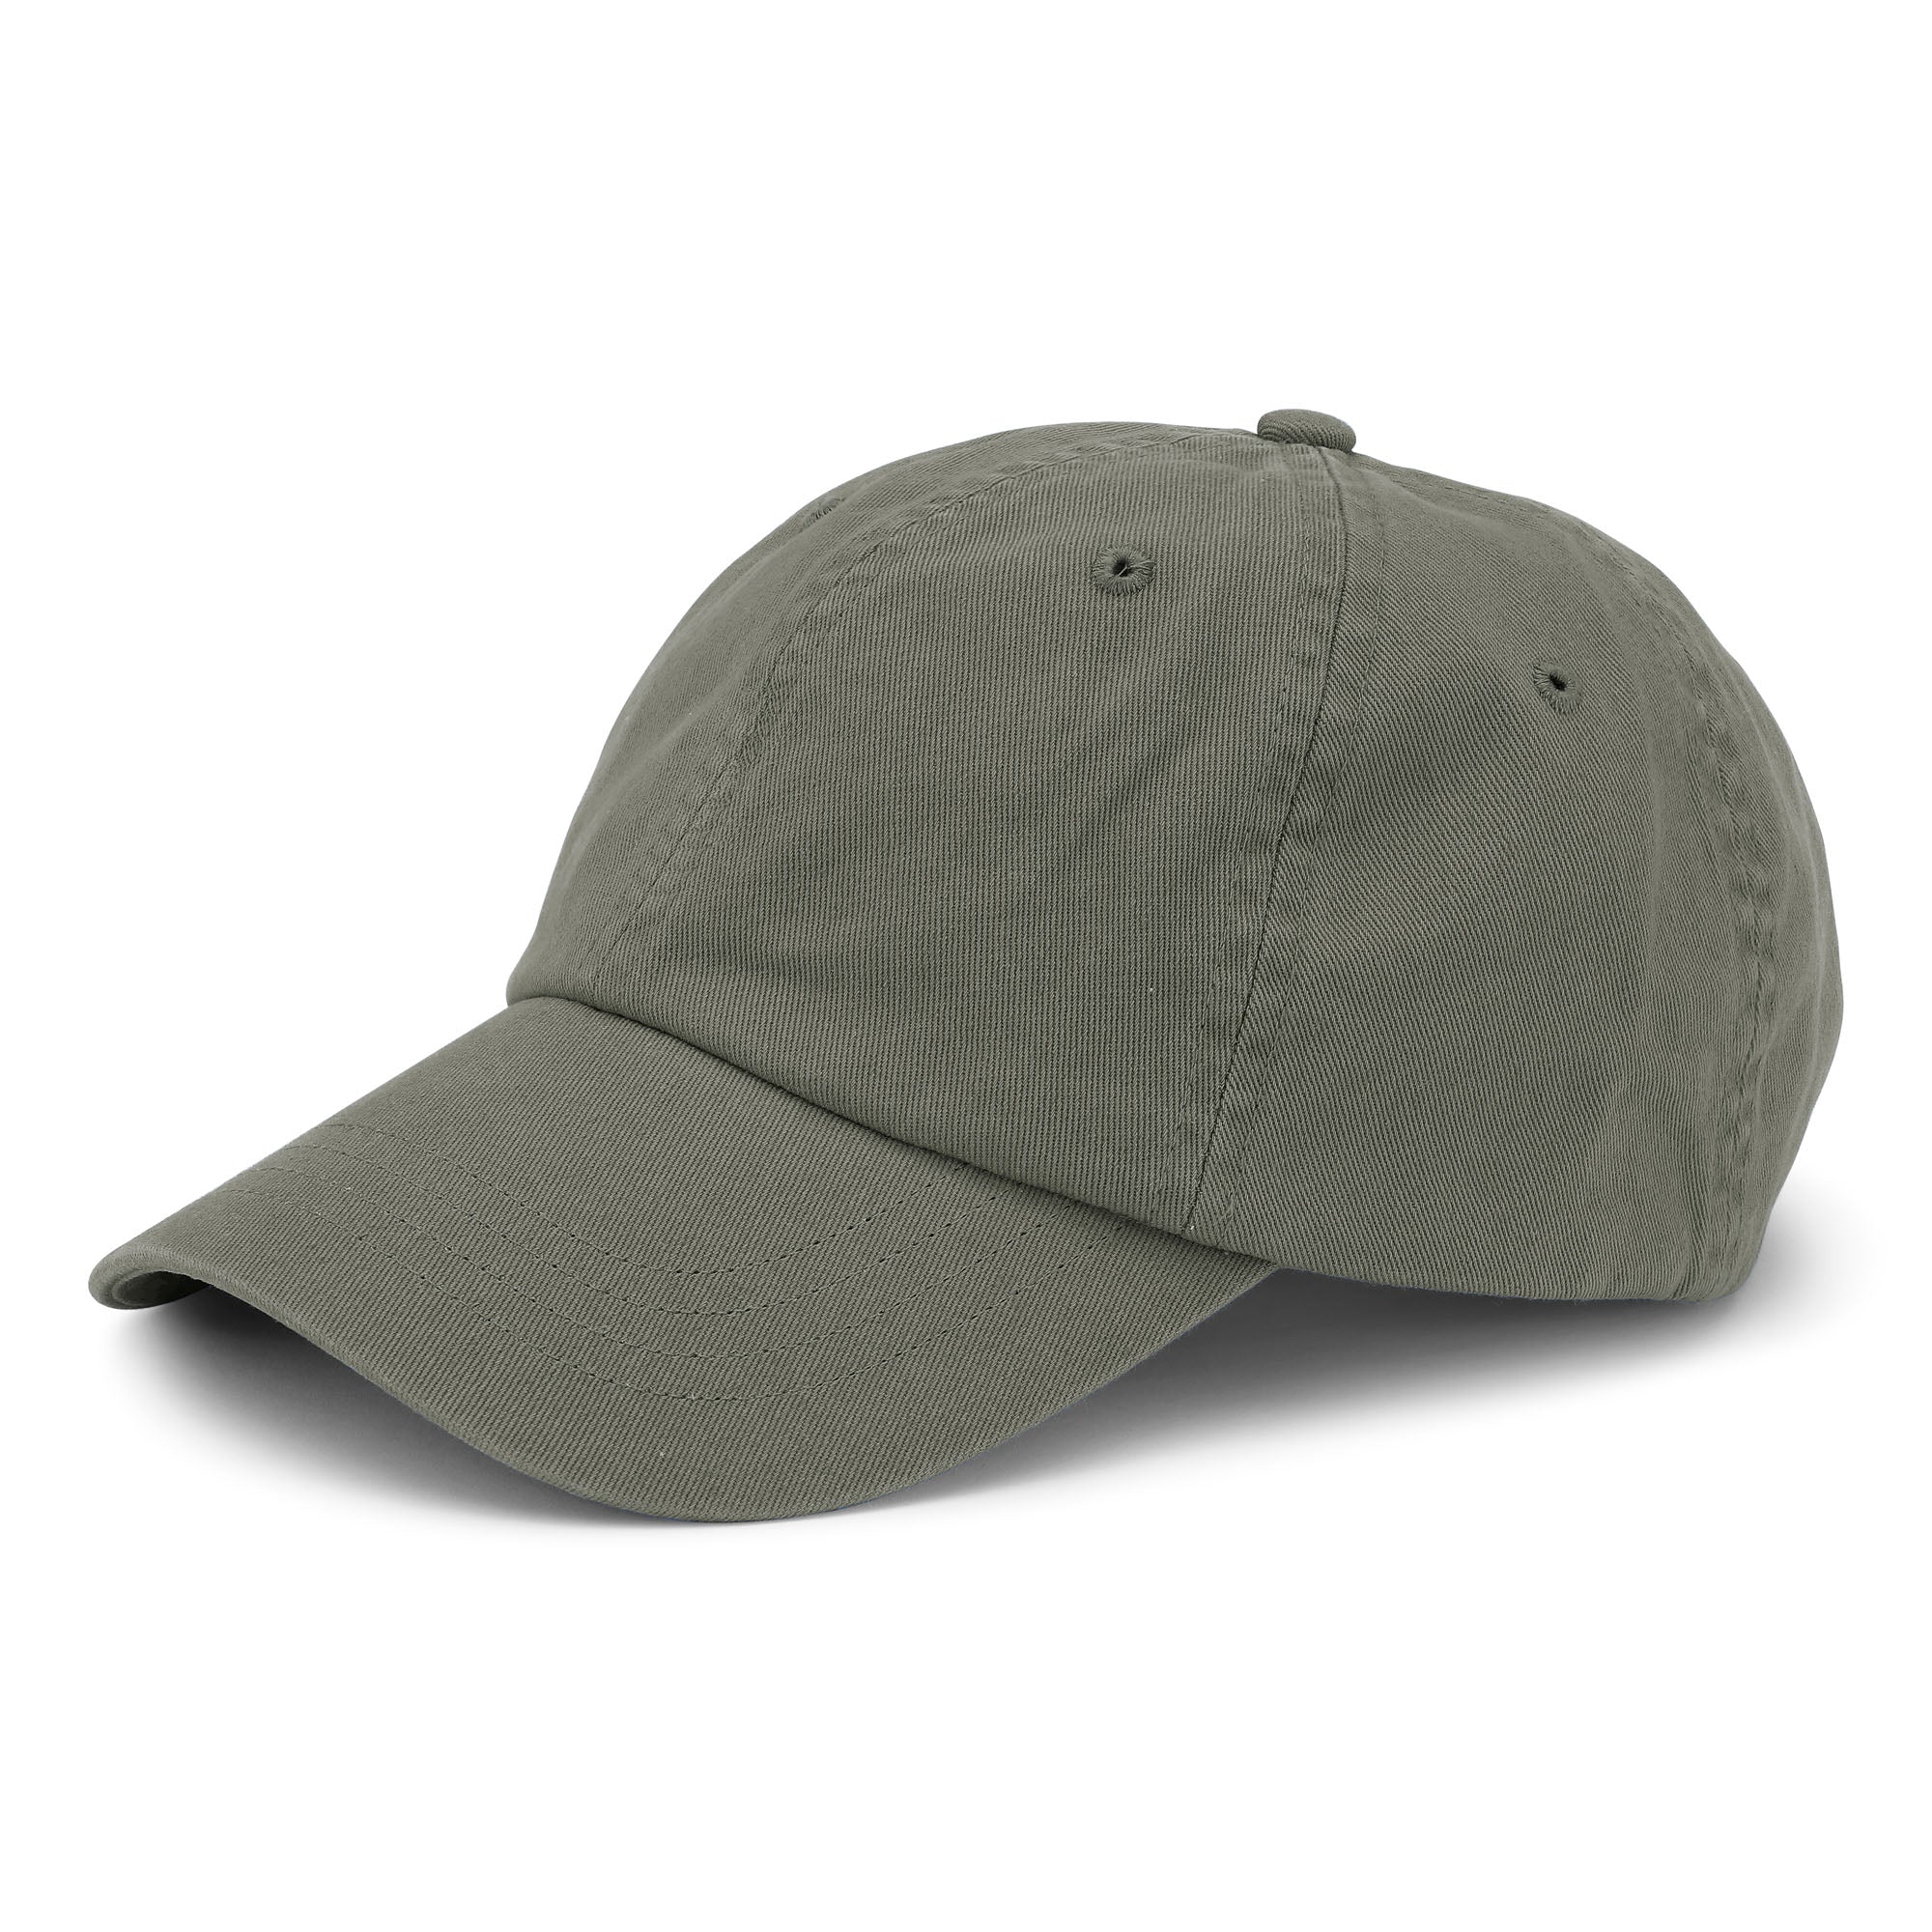 Organic Cotton Cap Dusty Olive One Size